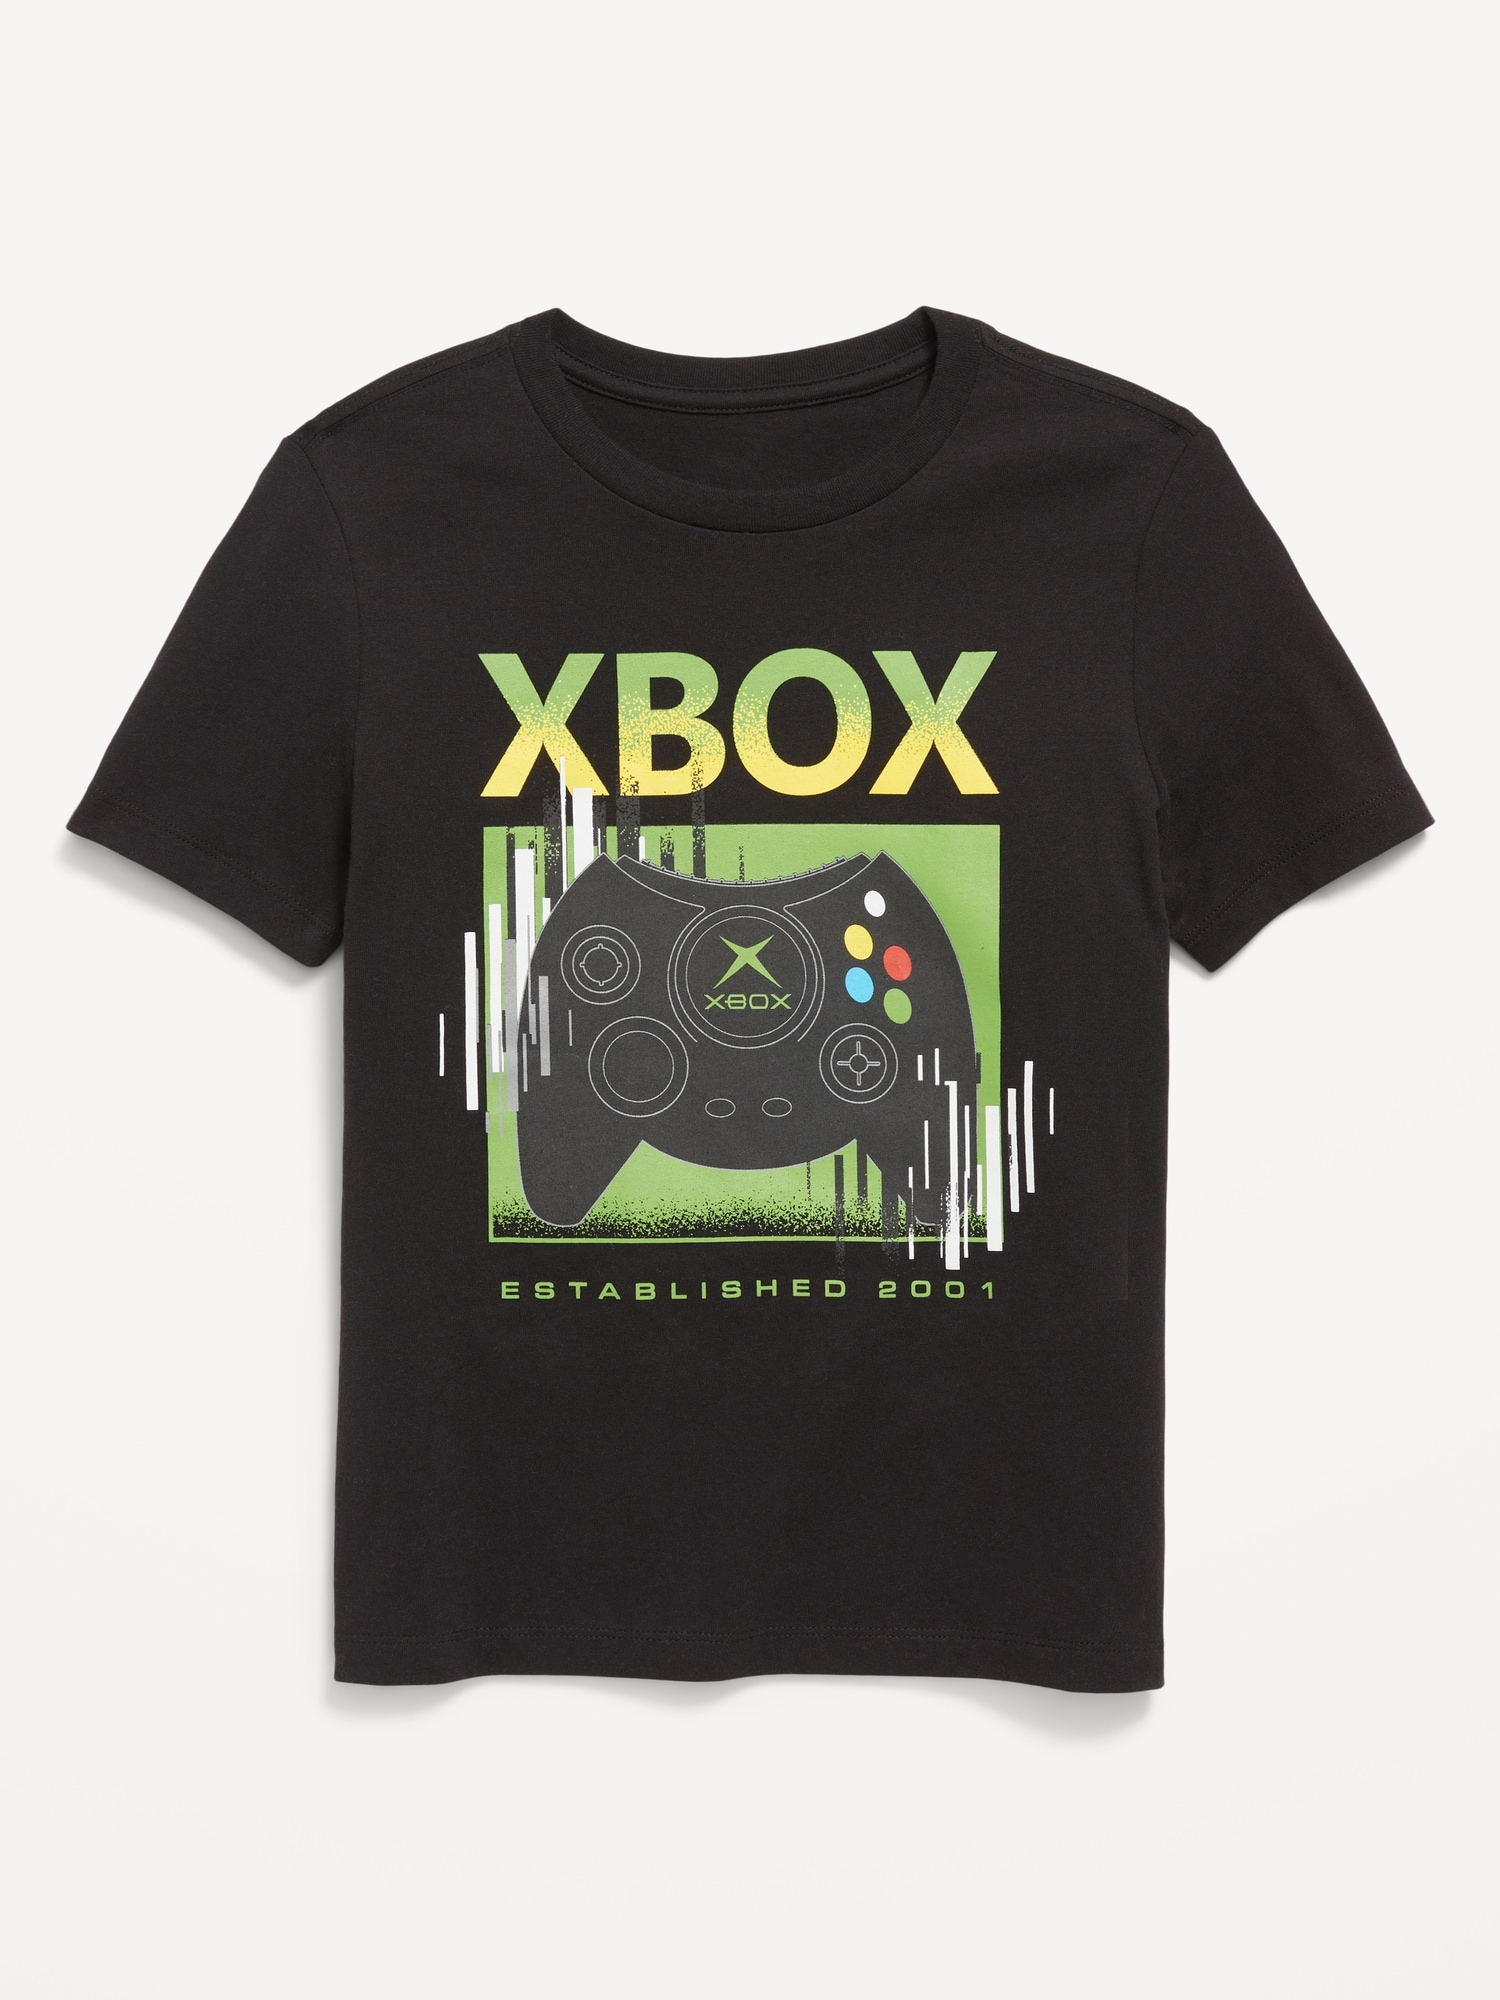 XBOX Gender-Neutral Graphic T-Shirt for Kids